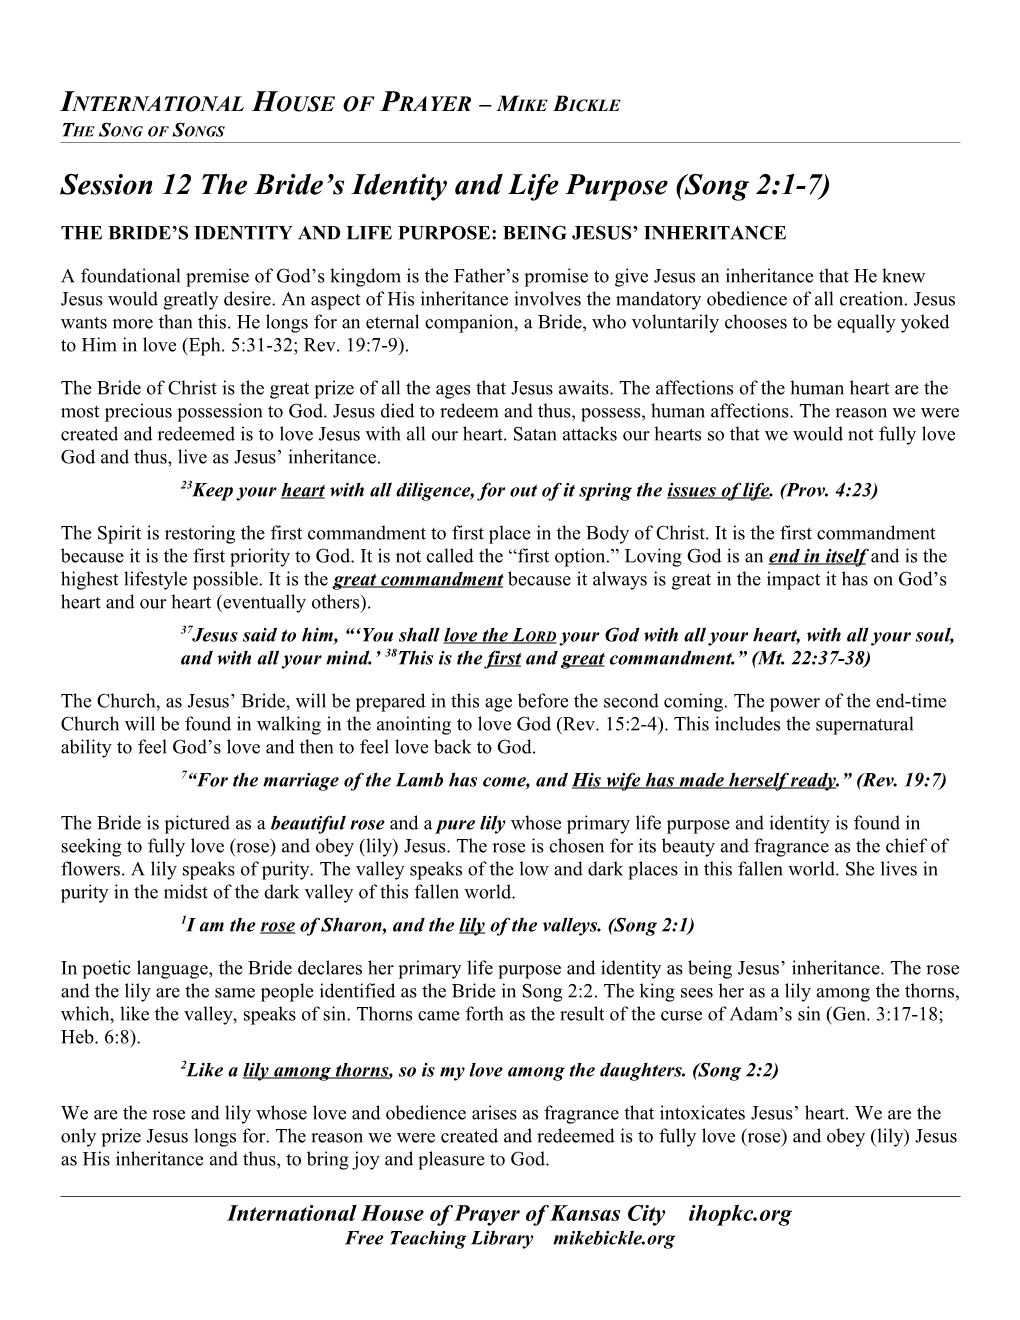 Session 12 the Bride S Identity and Life Purpose (Song 2:1-7) Page 7